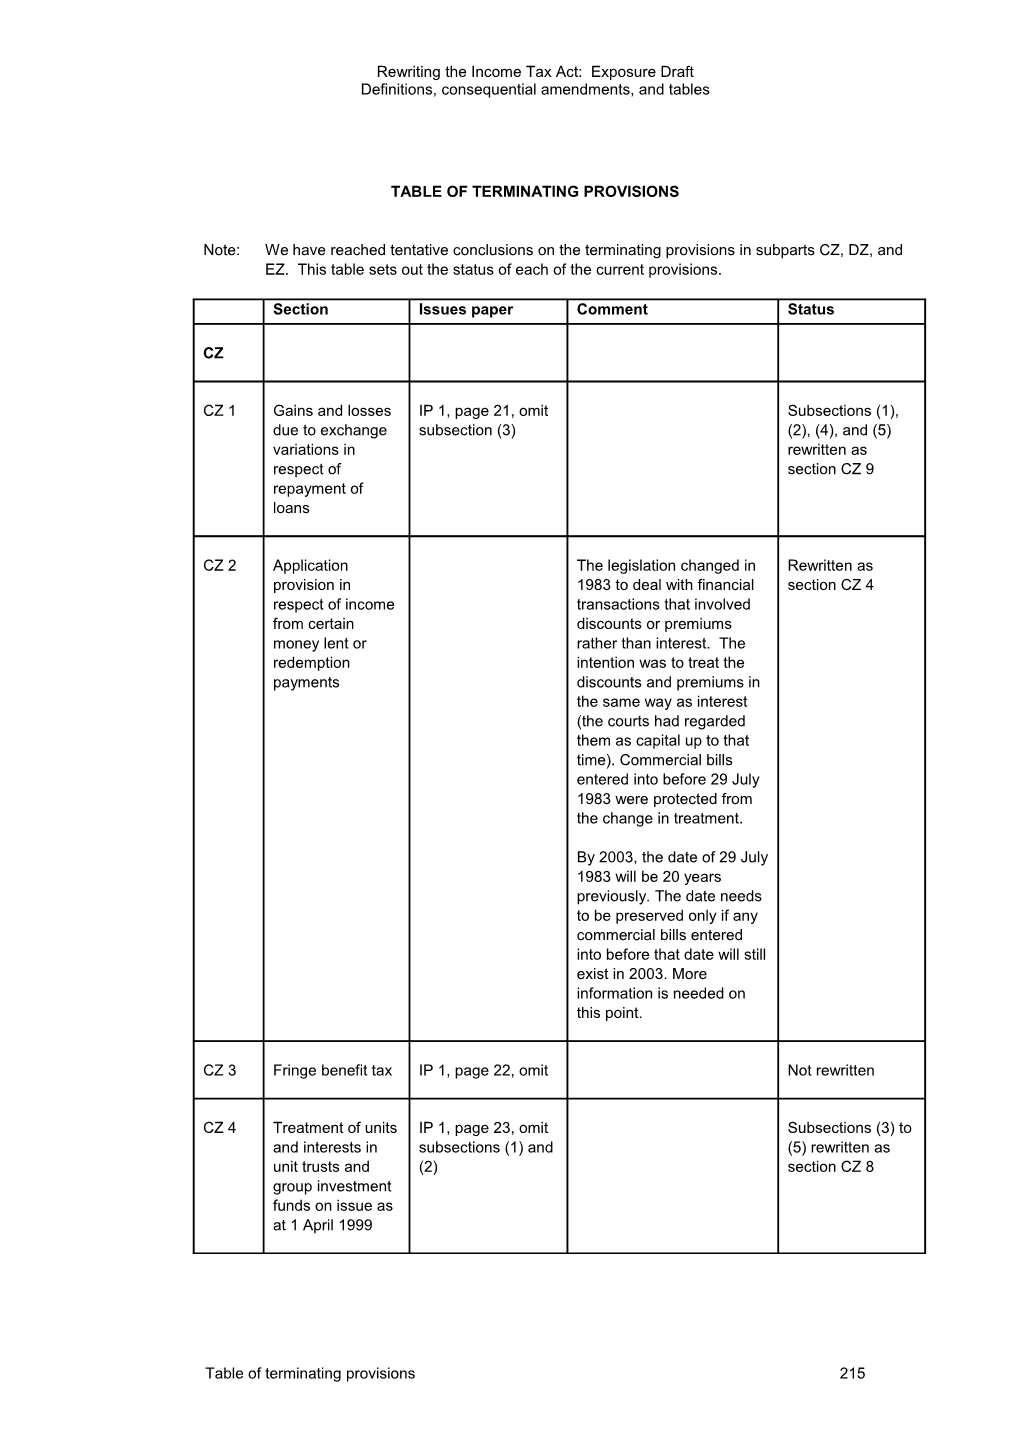 Rewriting the Income Tax Act - Exposure Draft - Table of Terminating Provisions